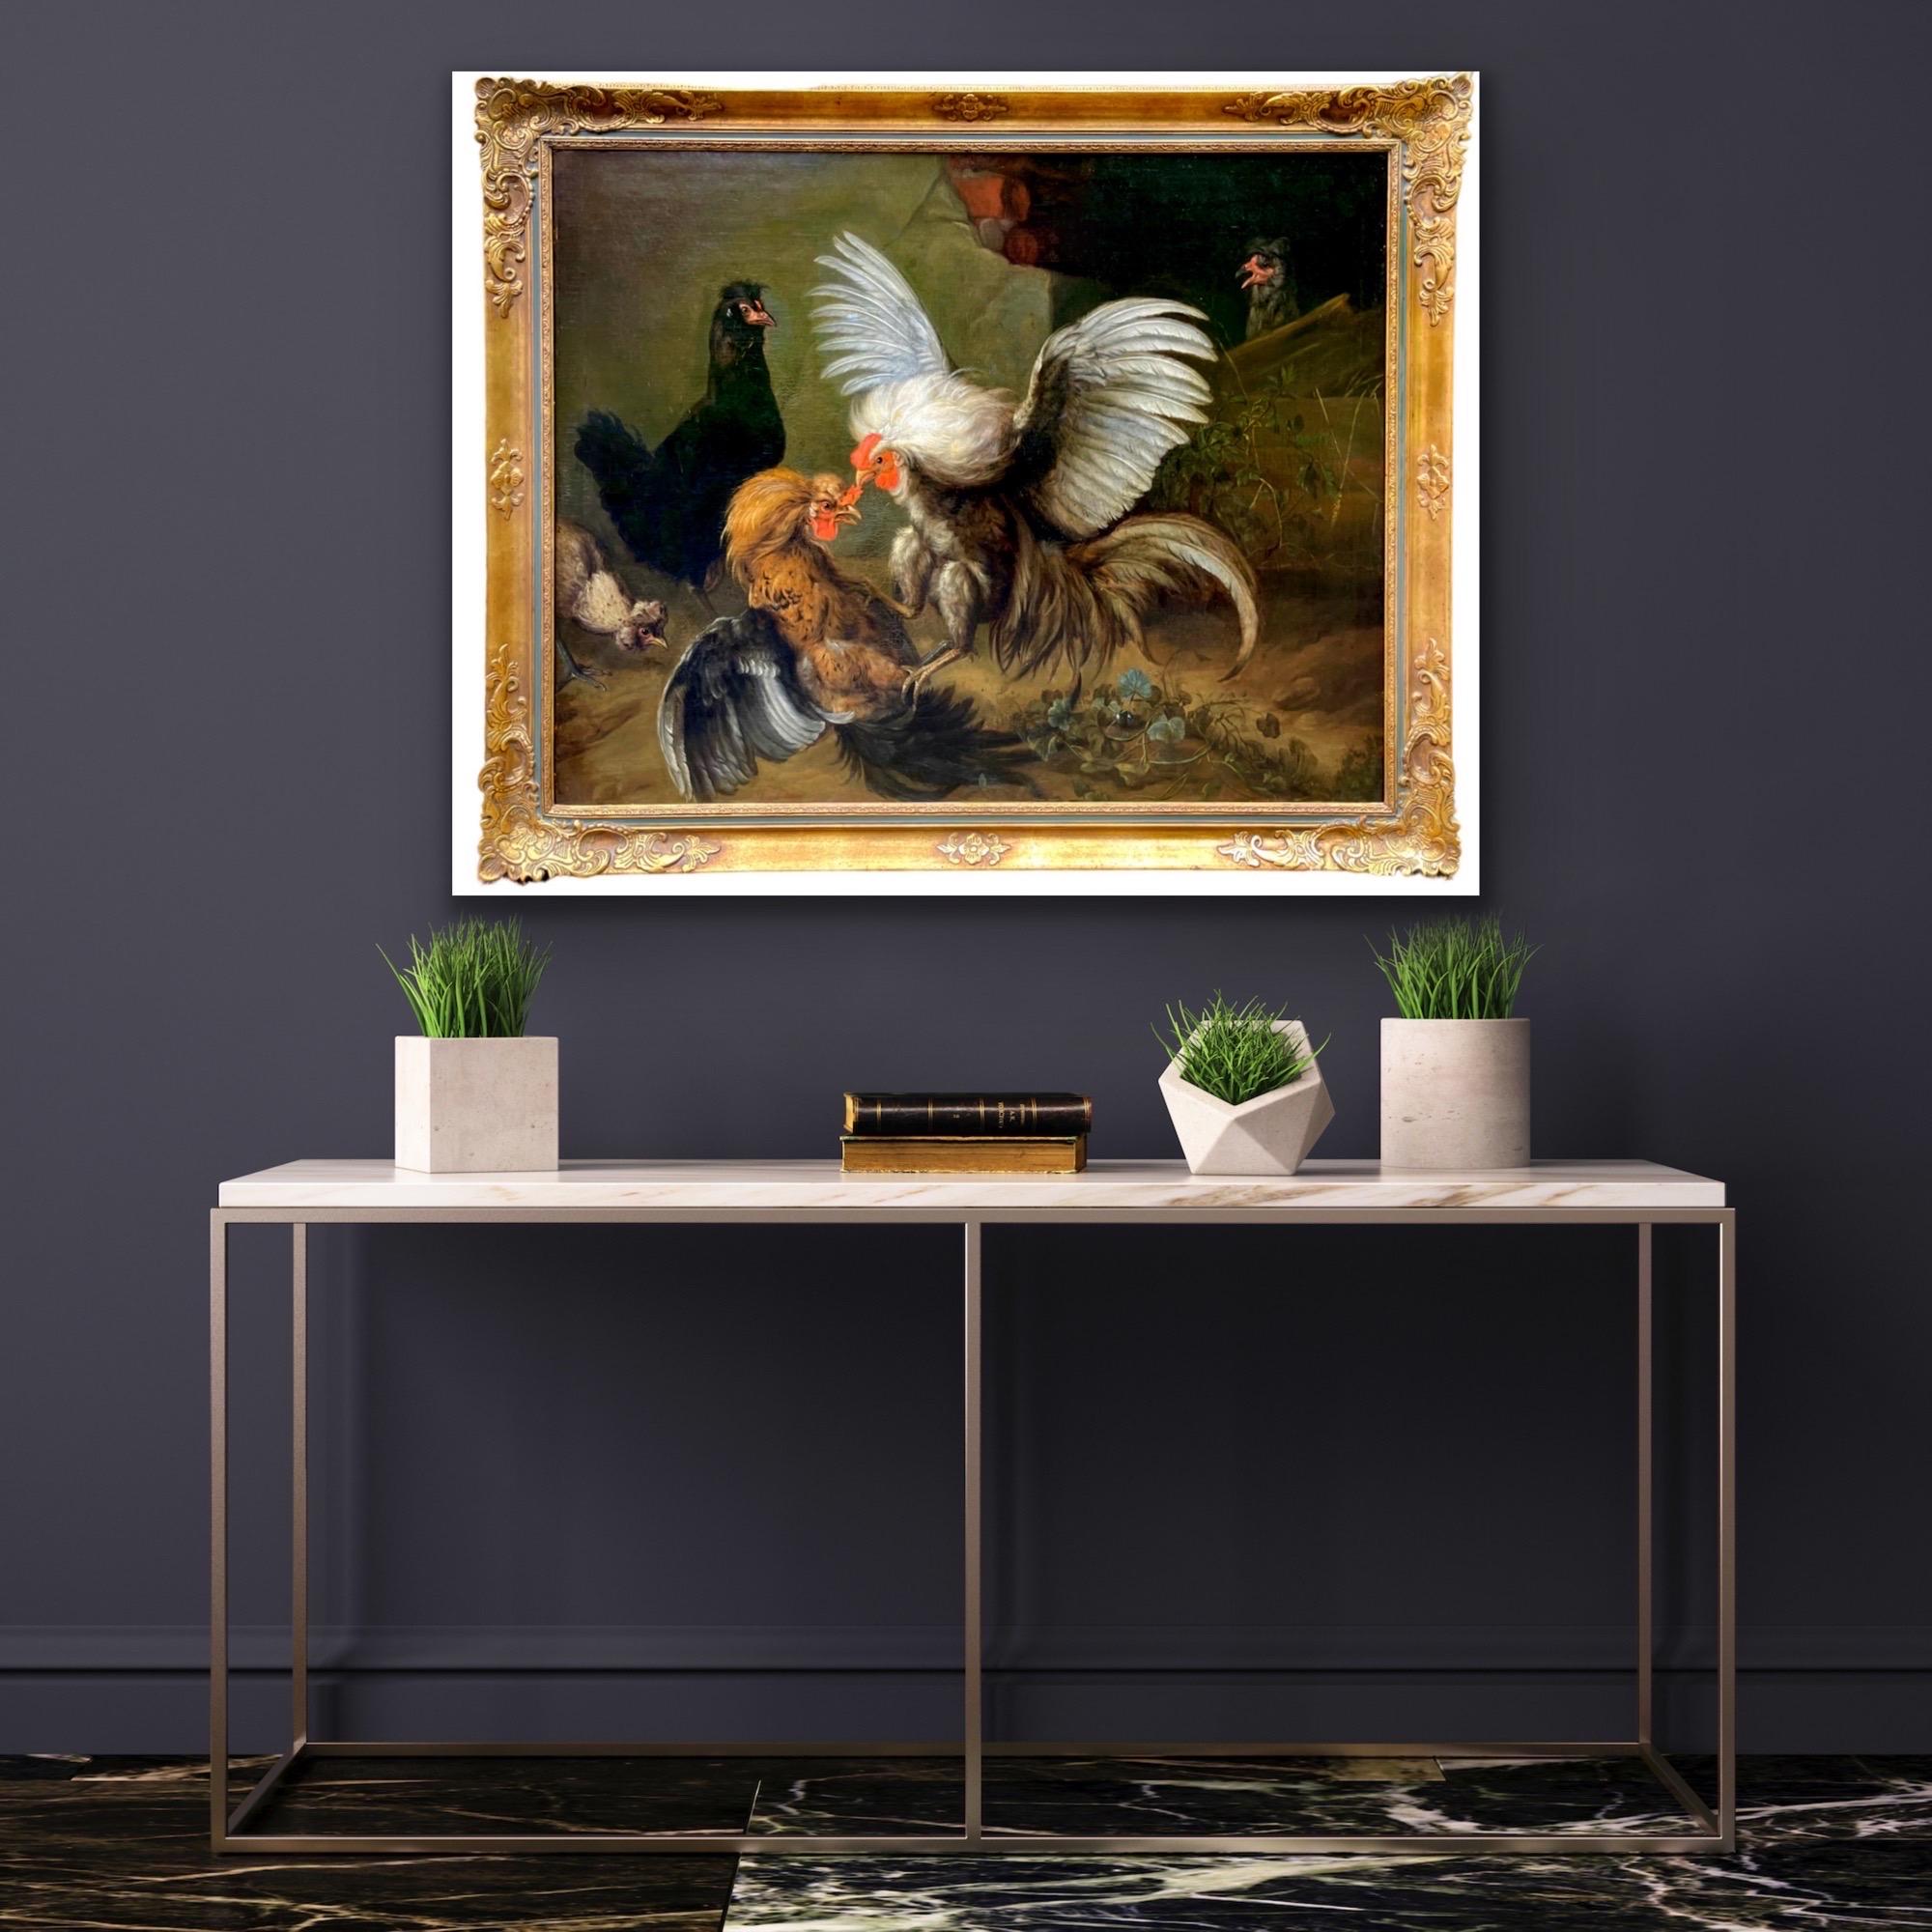 Huge 18th century Italian Old Master painting - Roosters fighting - Bird Cock 1